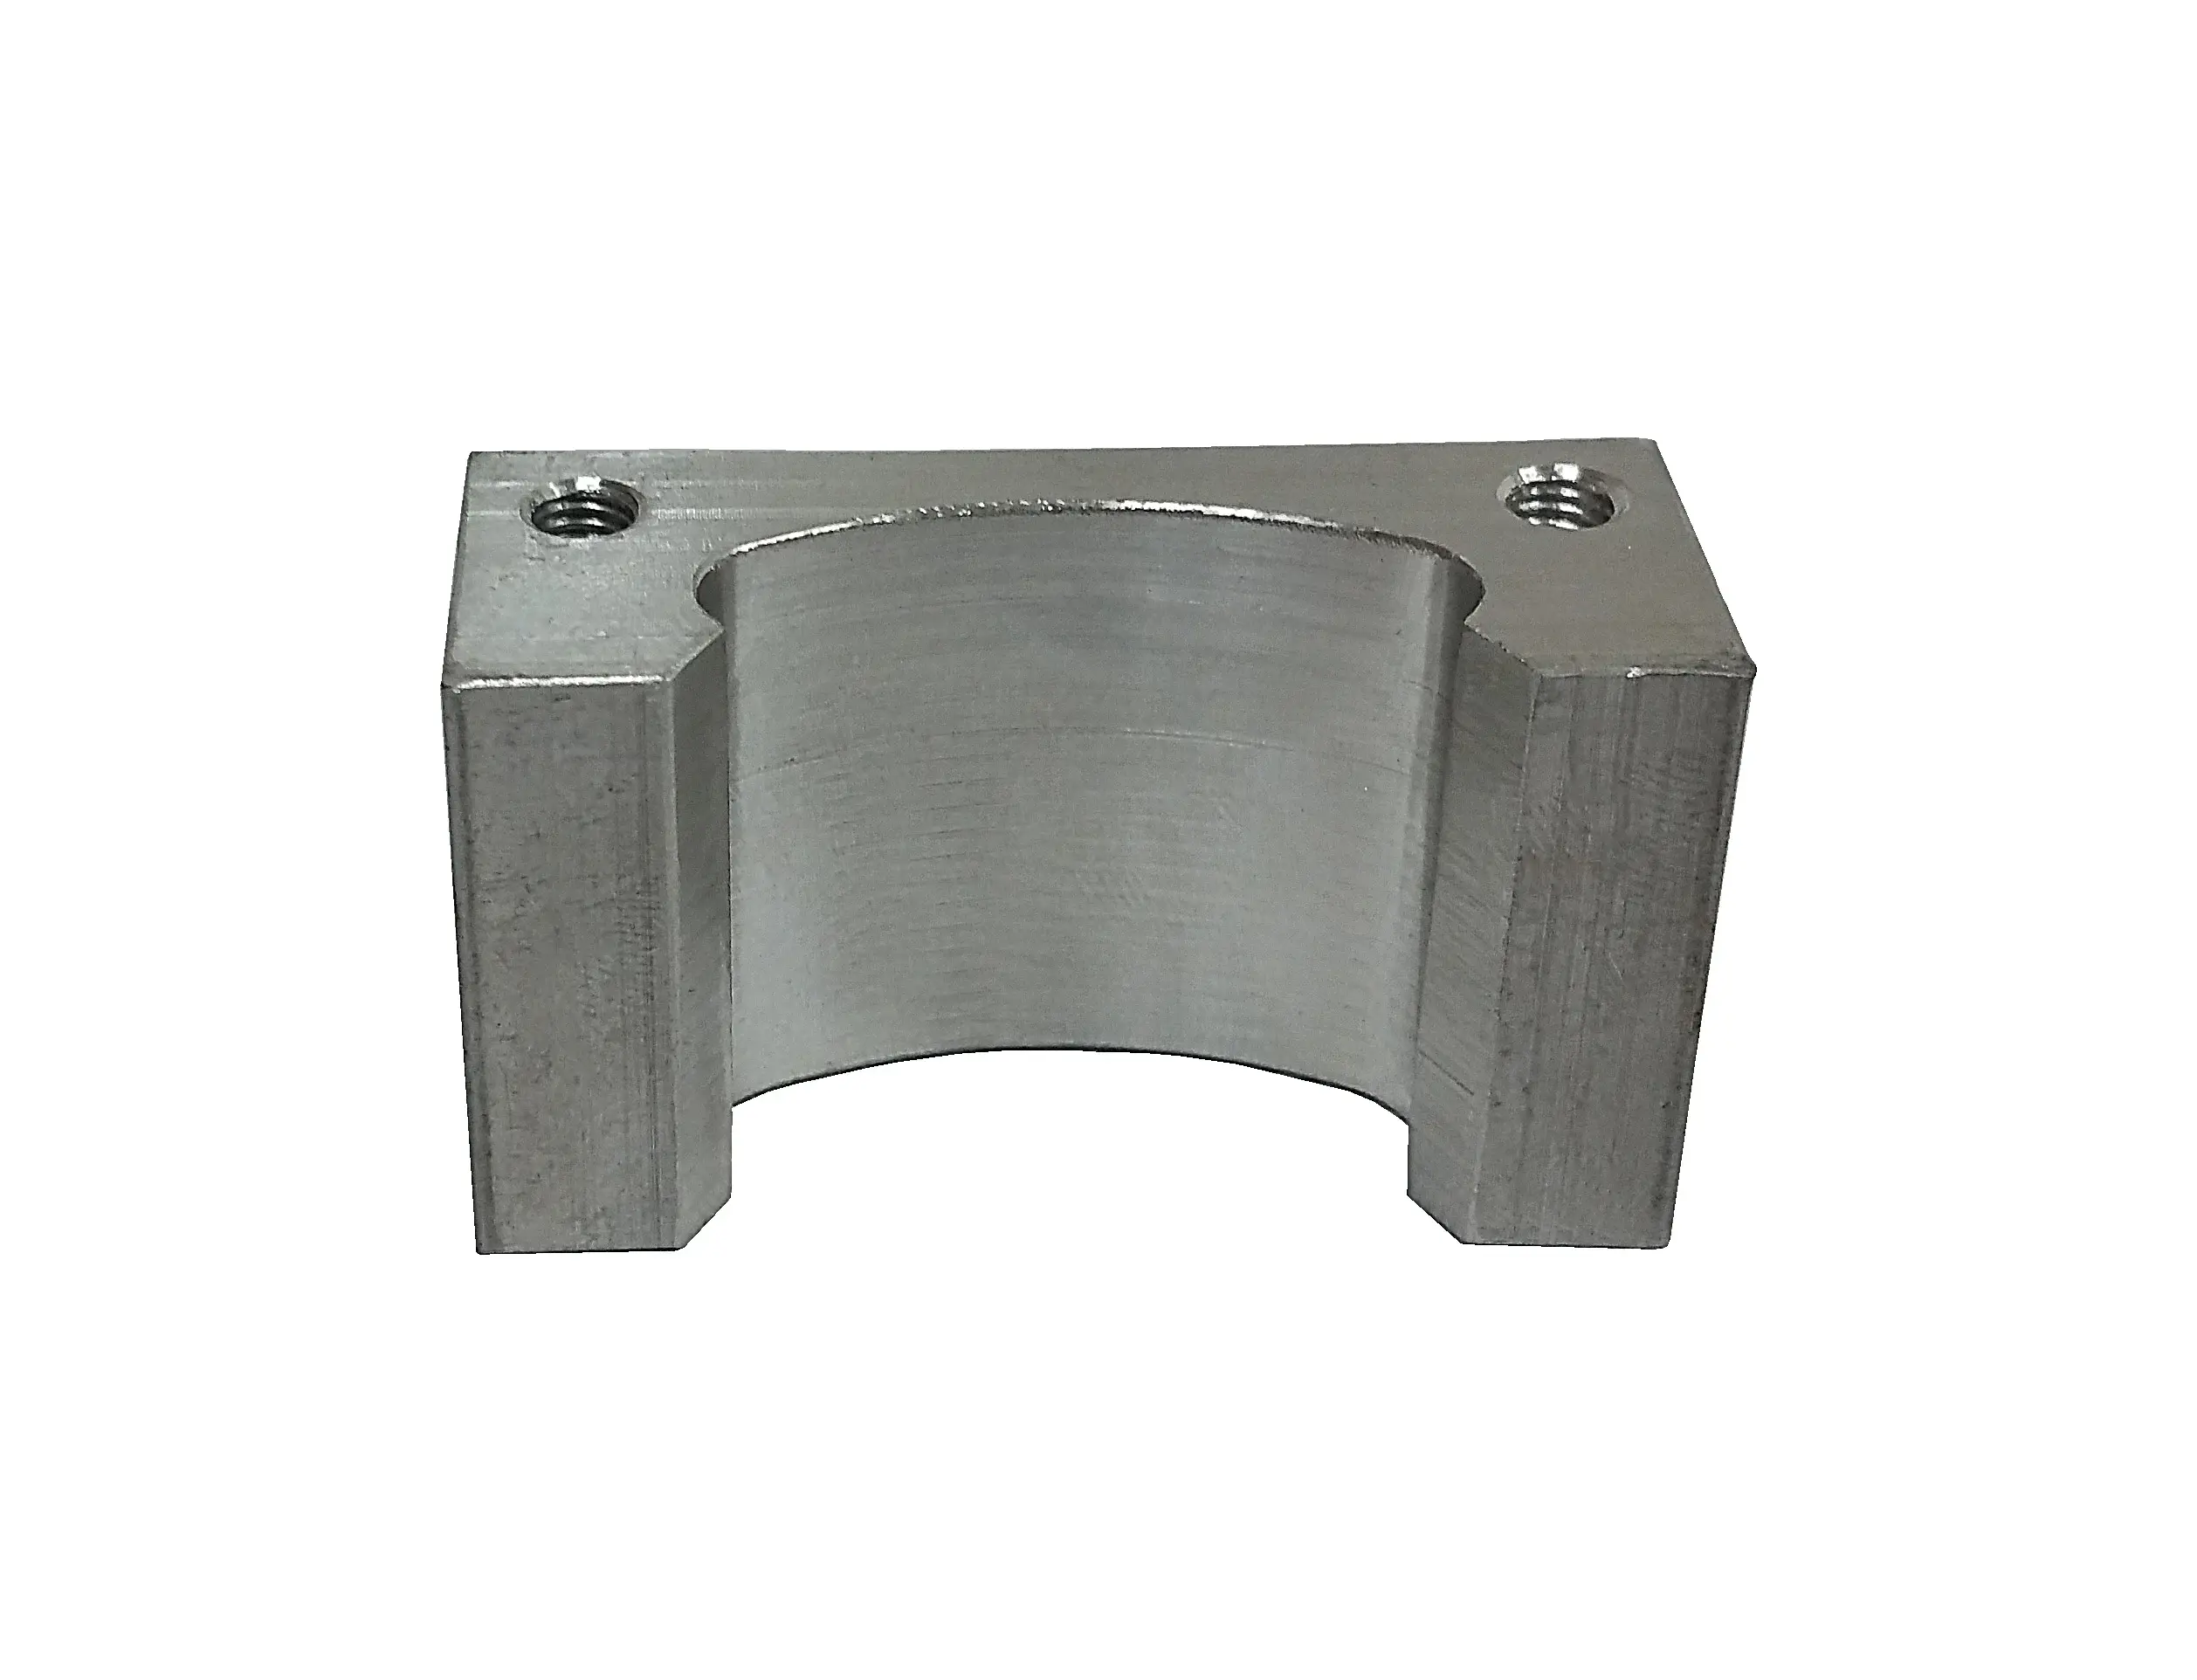 Machining Services _ Machined Part - Aluminum bar machined to 3⁄4 in2